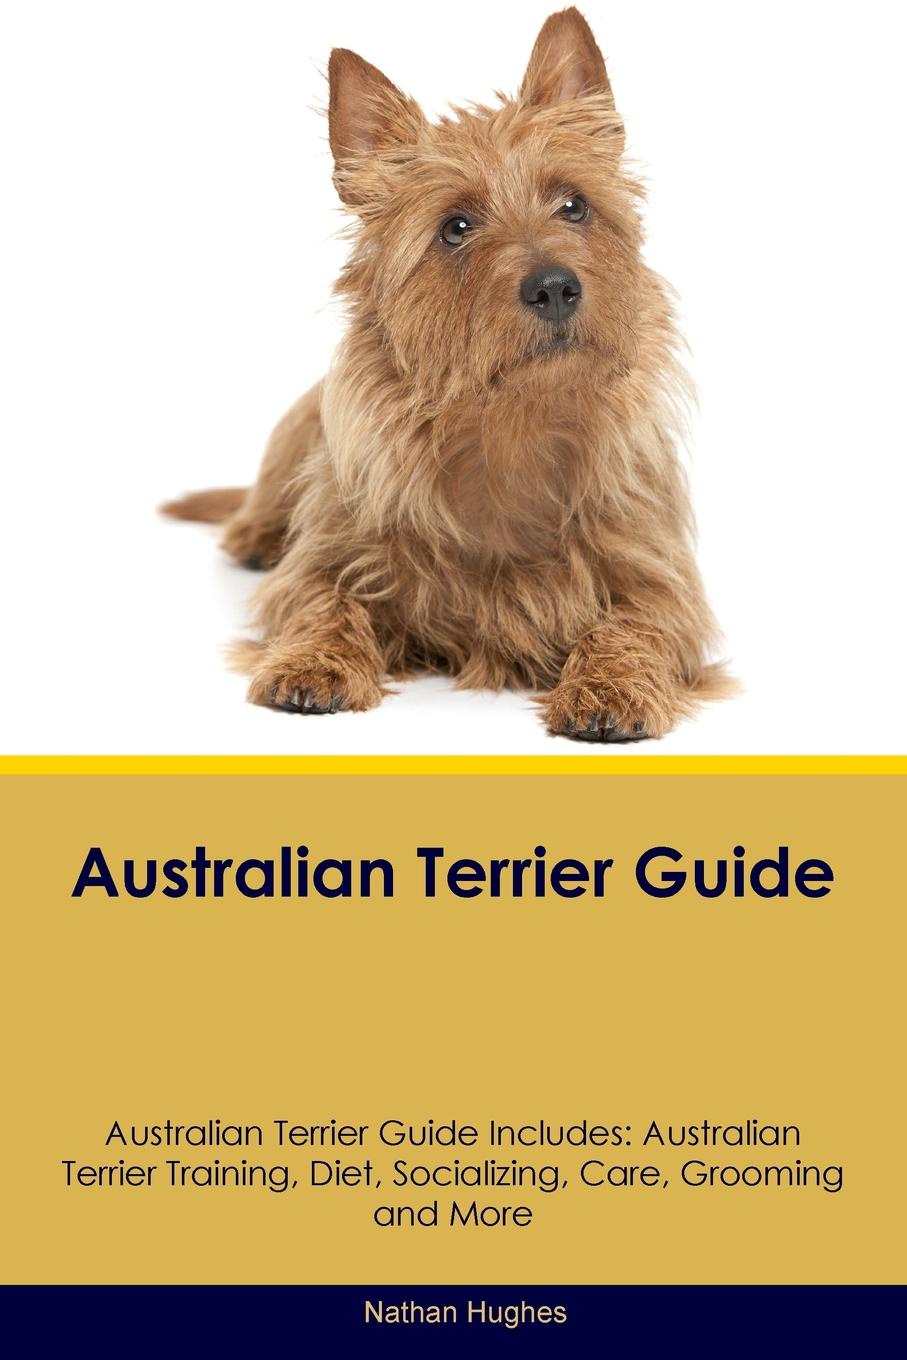 Australian Terrier Guide Australian Terrier Guide Includes. Australian Terrier Training, Diet, Socializing, Care, Grooming, Breeding and More